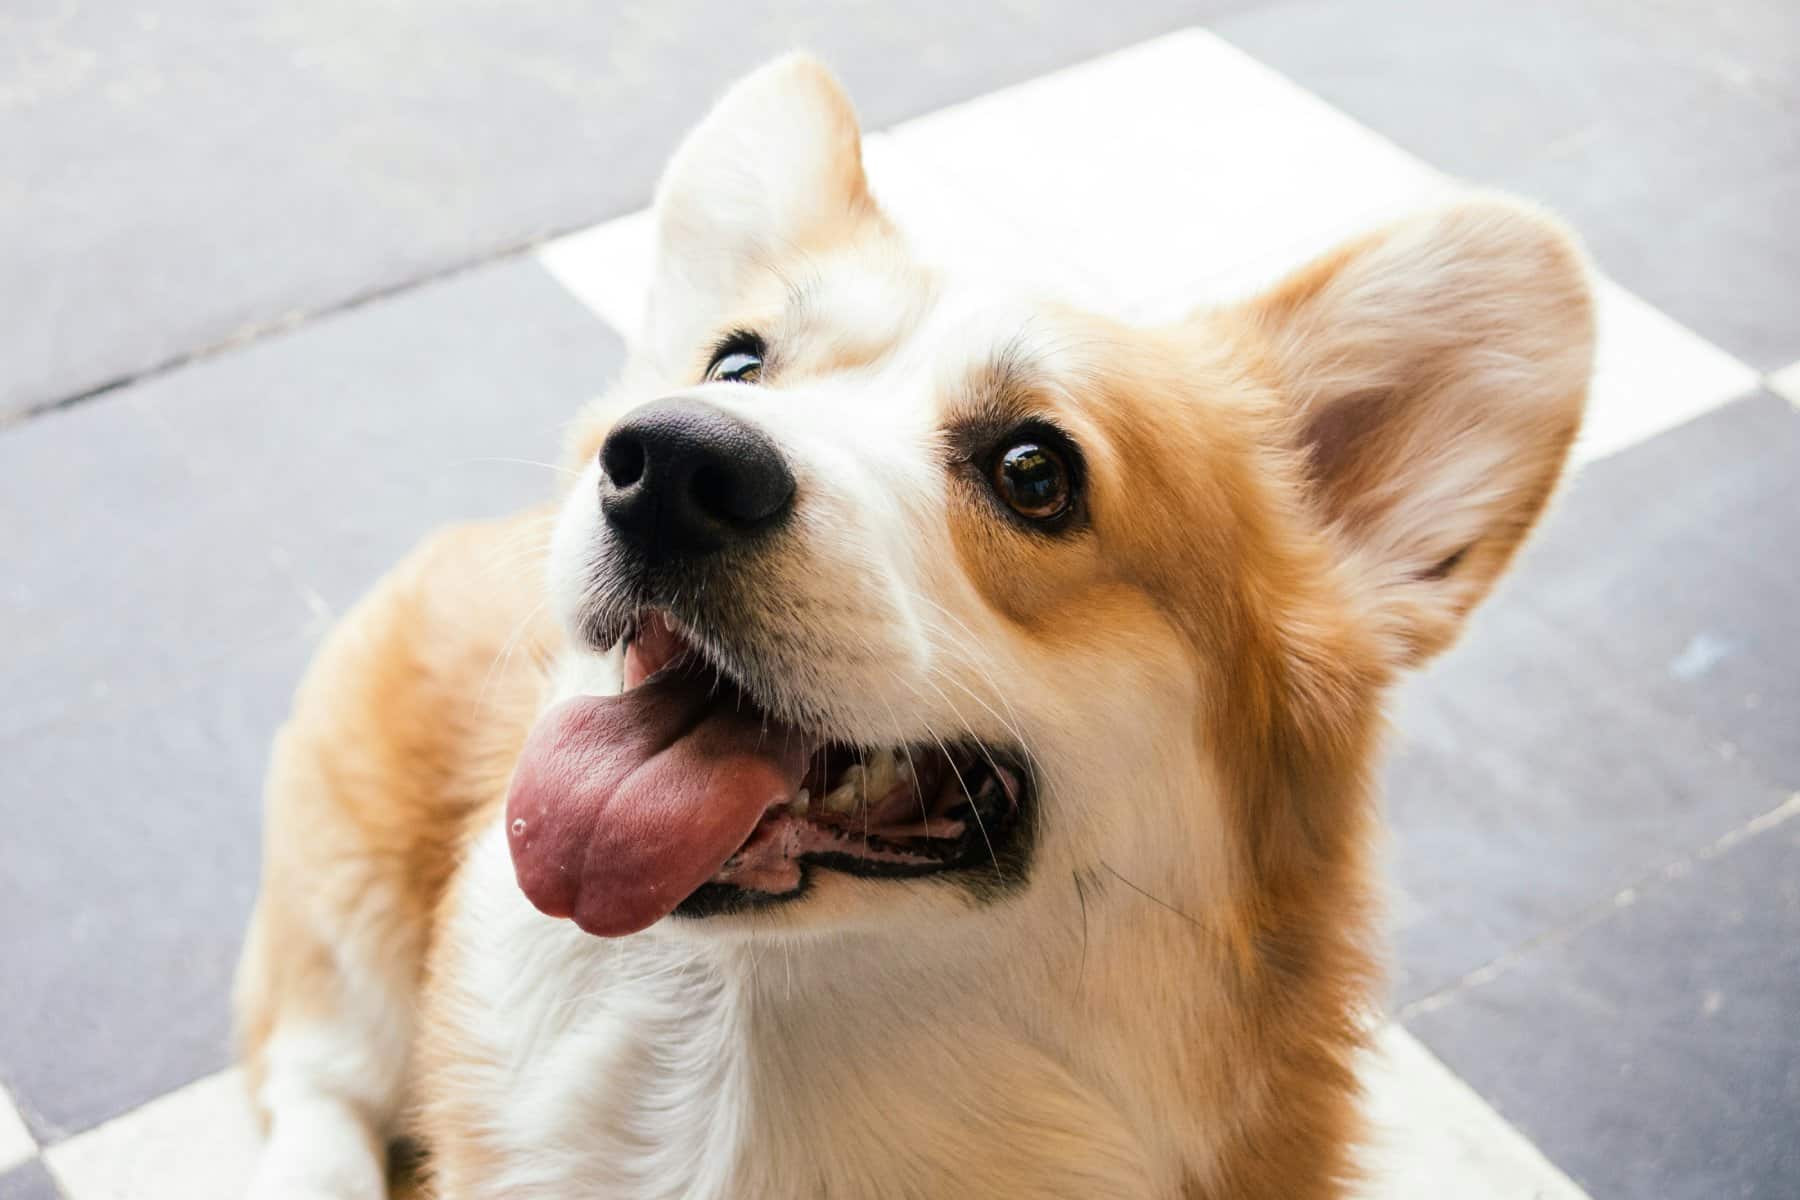 Is it hard to raise a corgi? Tips for new corgi owners to keep their corgi smiling happy like this Pembroke Welsh Corgi looking off at his owner.